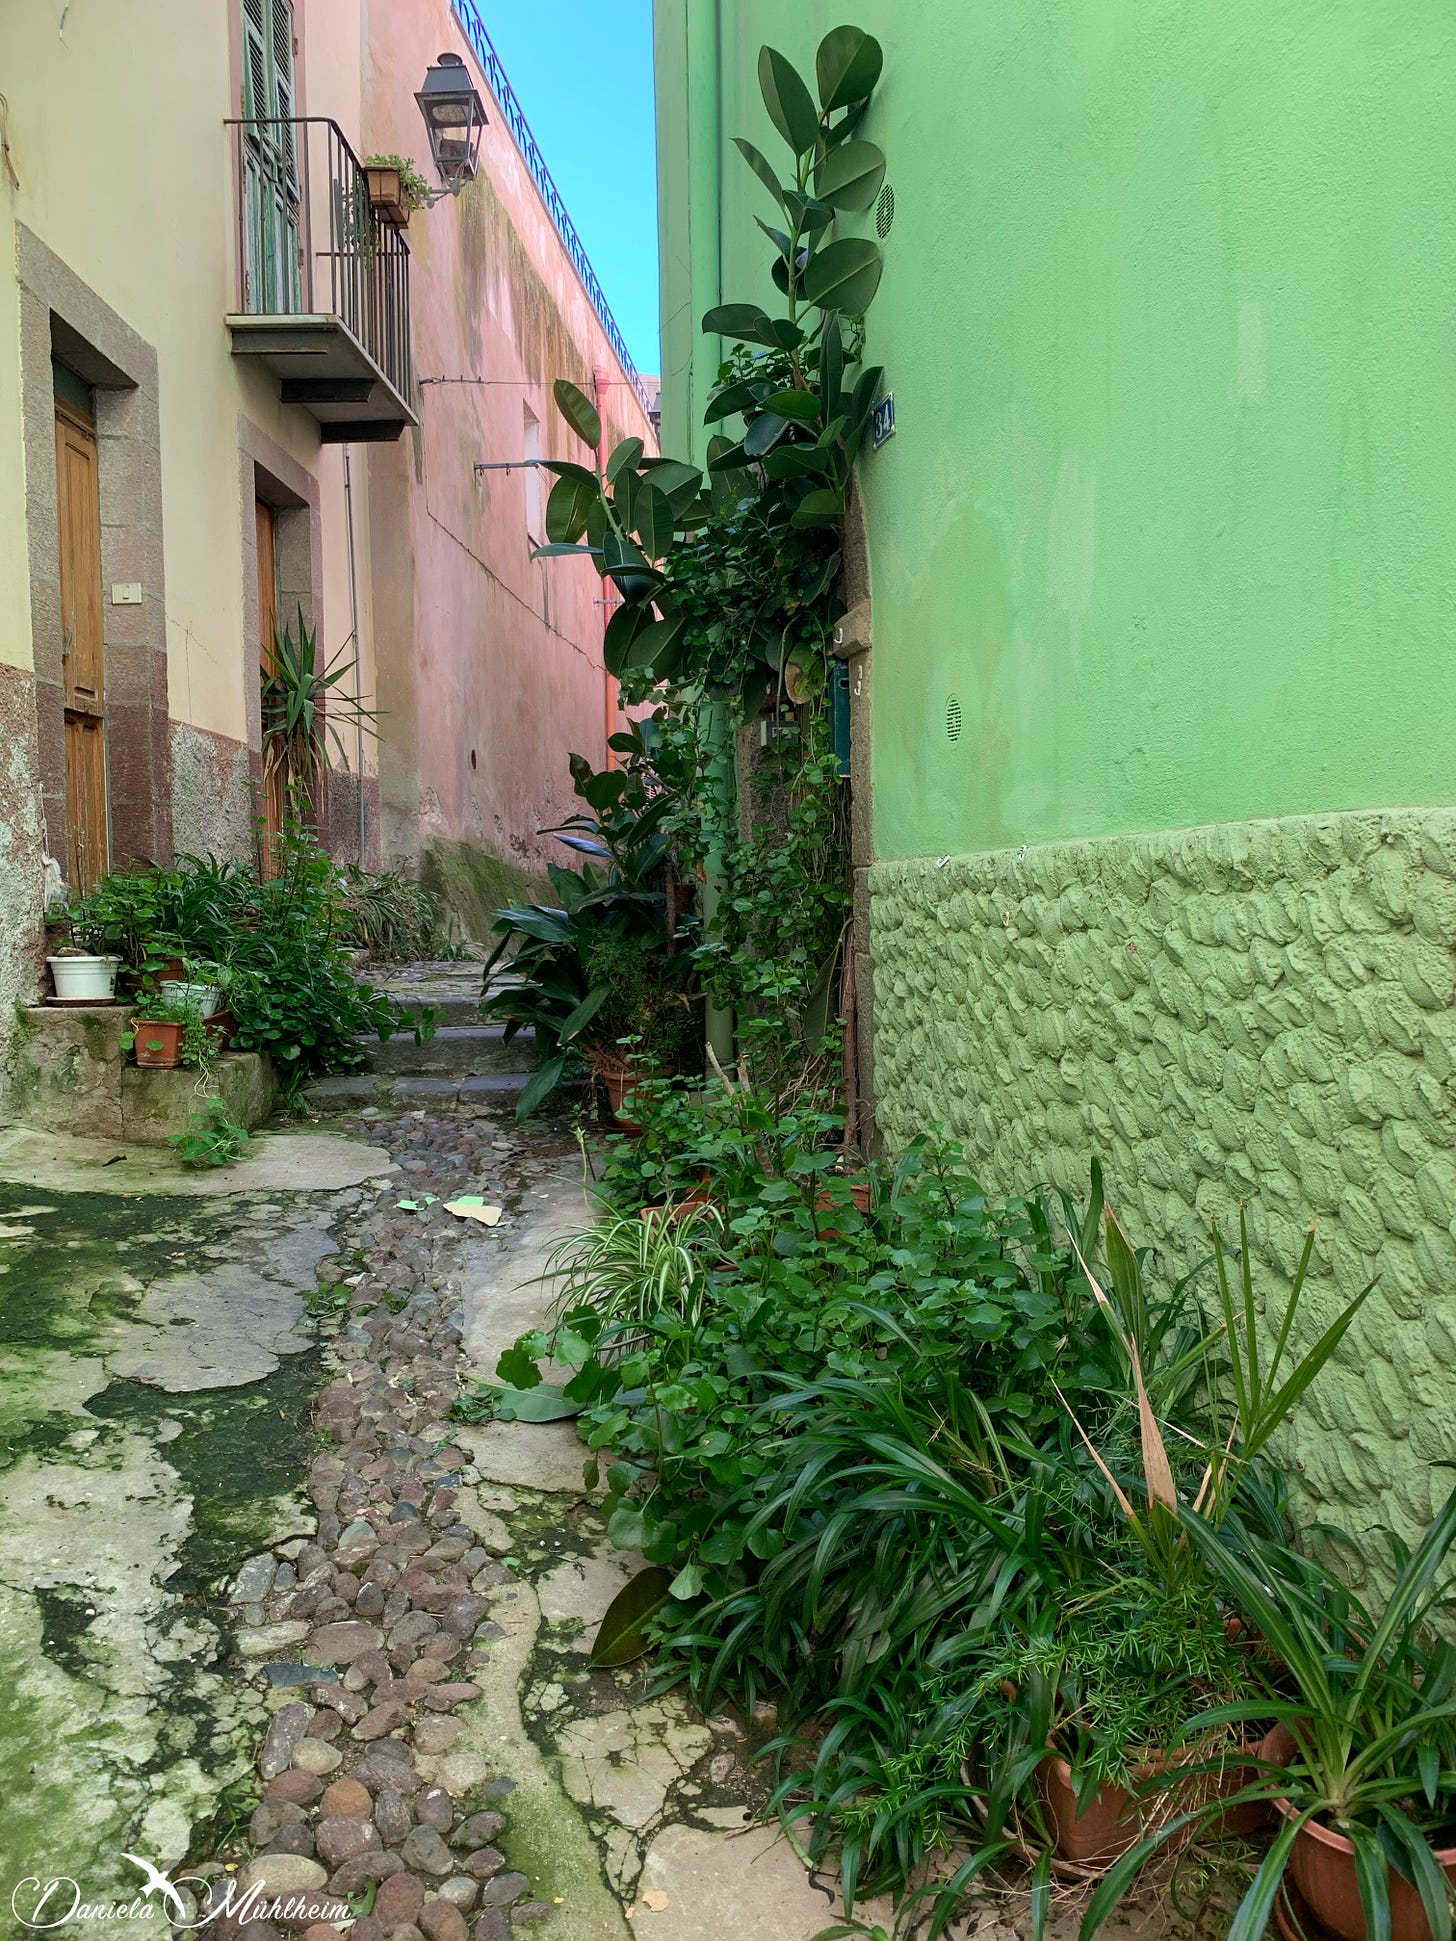 a narrow street in an italian town, houses in green rose a light yellow